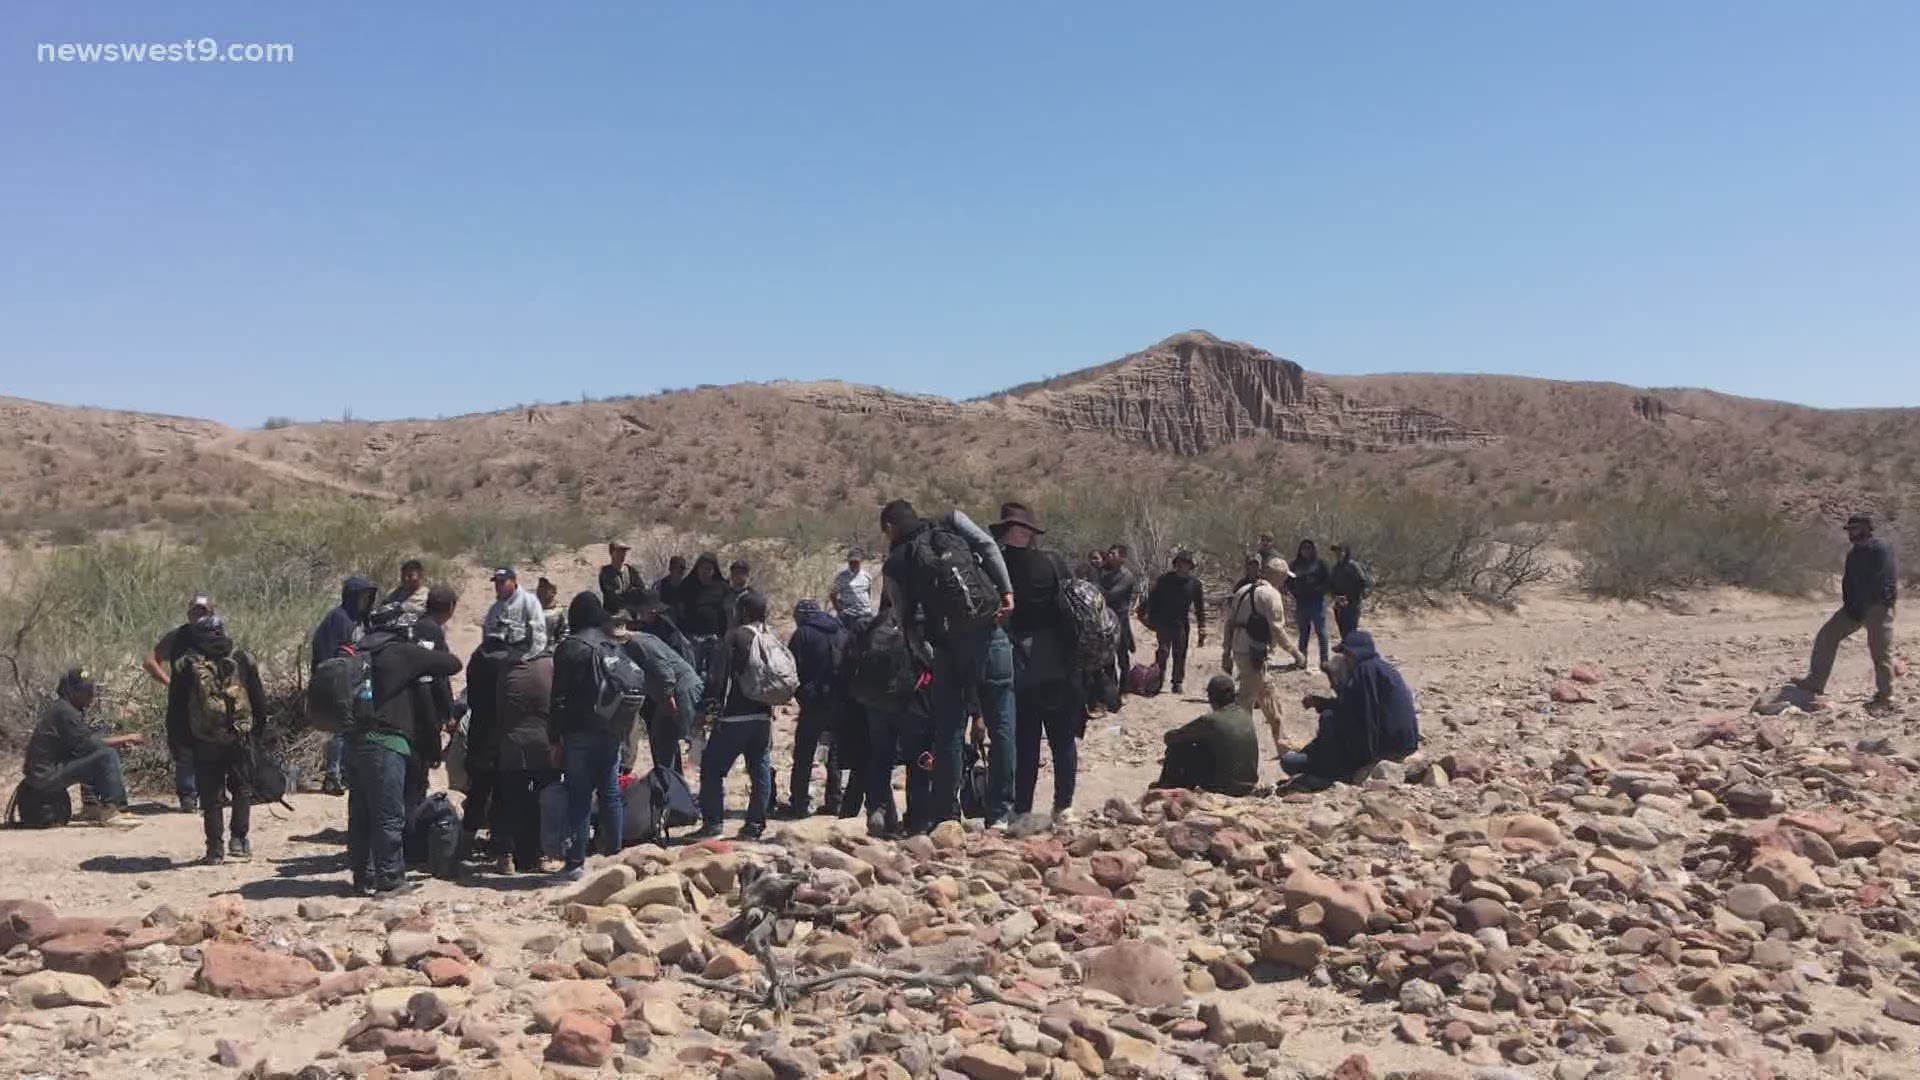 Agents apprehended more than 50 undocumented migrants near Valentine and over 130 near Van Horn.